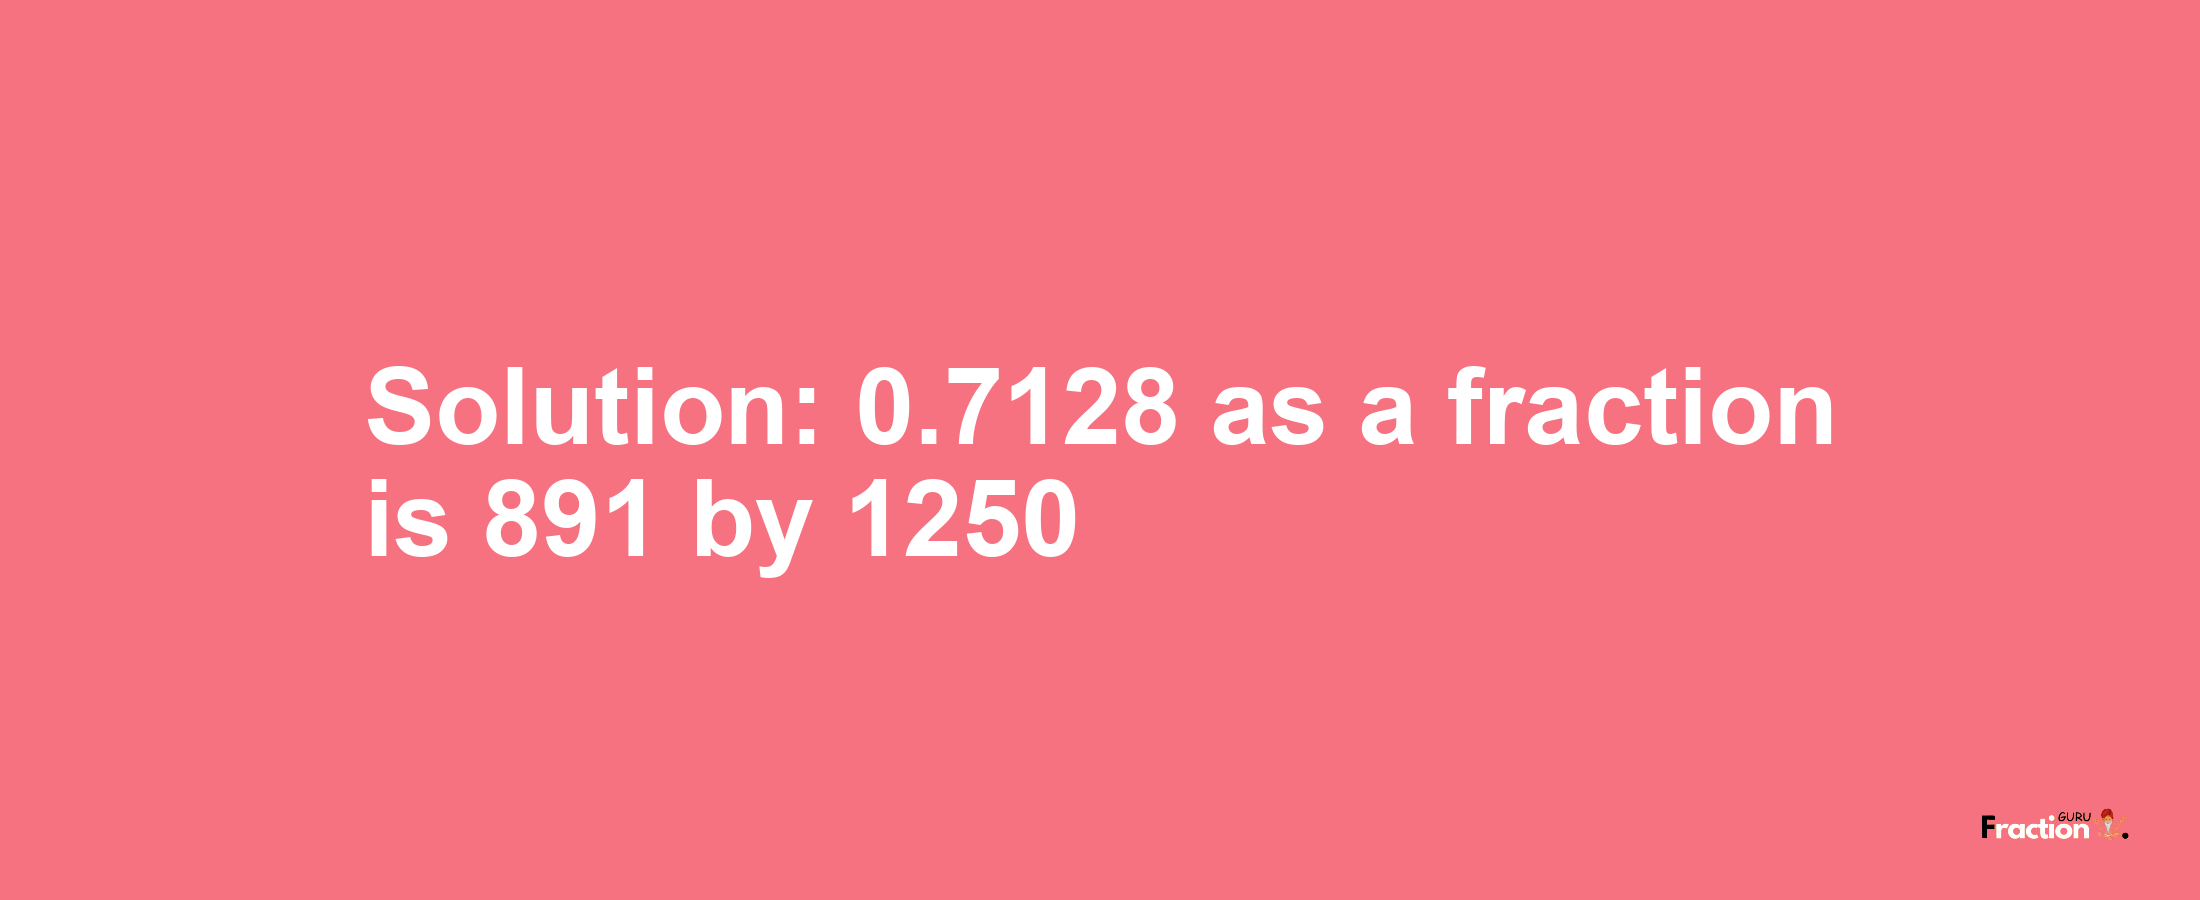 Solution:0.7128 as a fraction is 891/1250